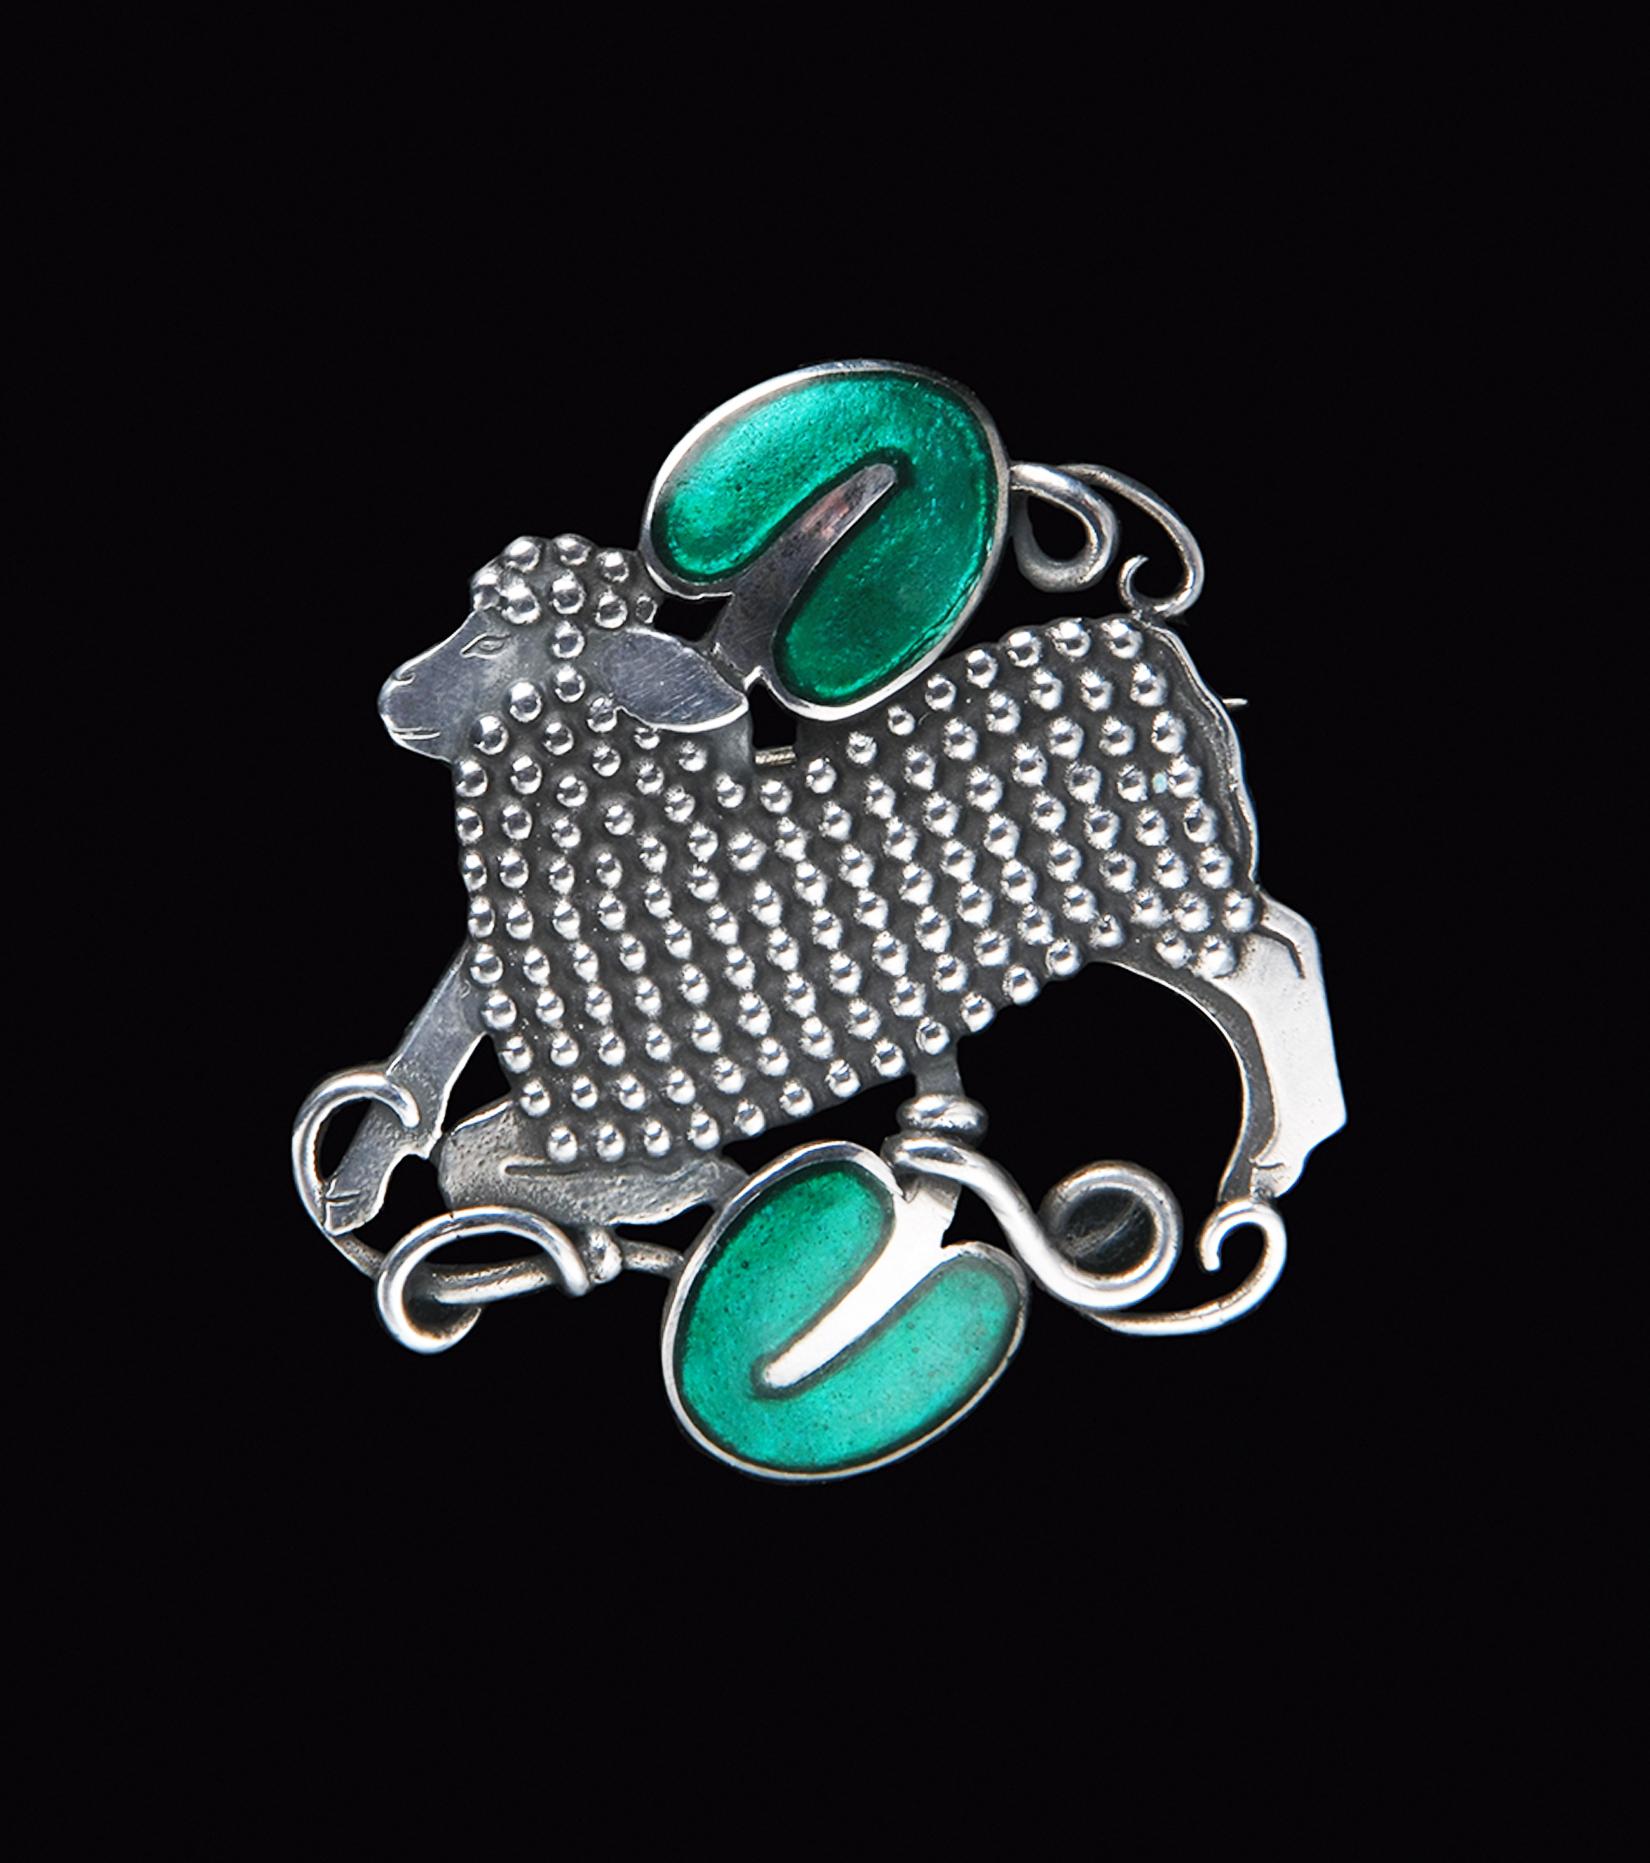 Rare Georg Jensen Arno Malinowski silver enamel lamb brooch, Denmark, circa 1942. The Brooch with realistic lamb and green enamel hearts, full vintage marks to reverse GJ 925 sterling Denmark and numbered 284. Dimensions: Approximately 1.25 x 1.25